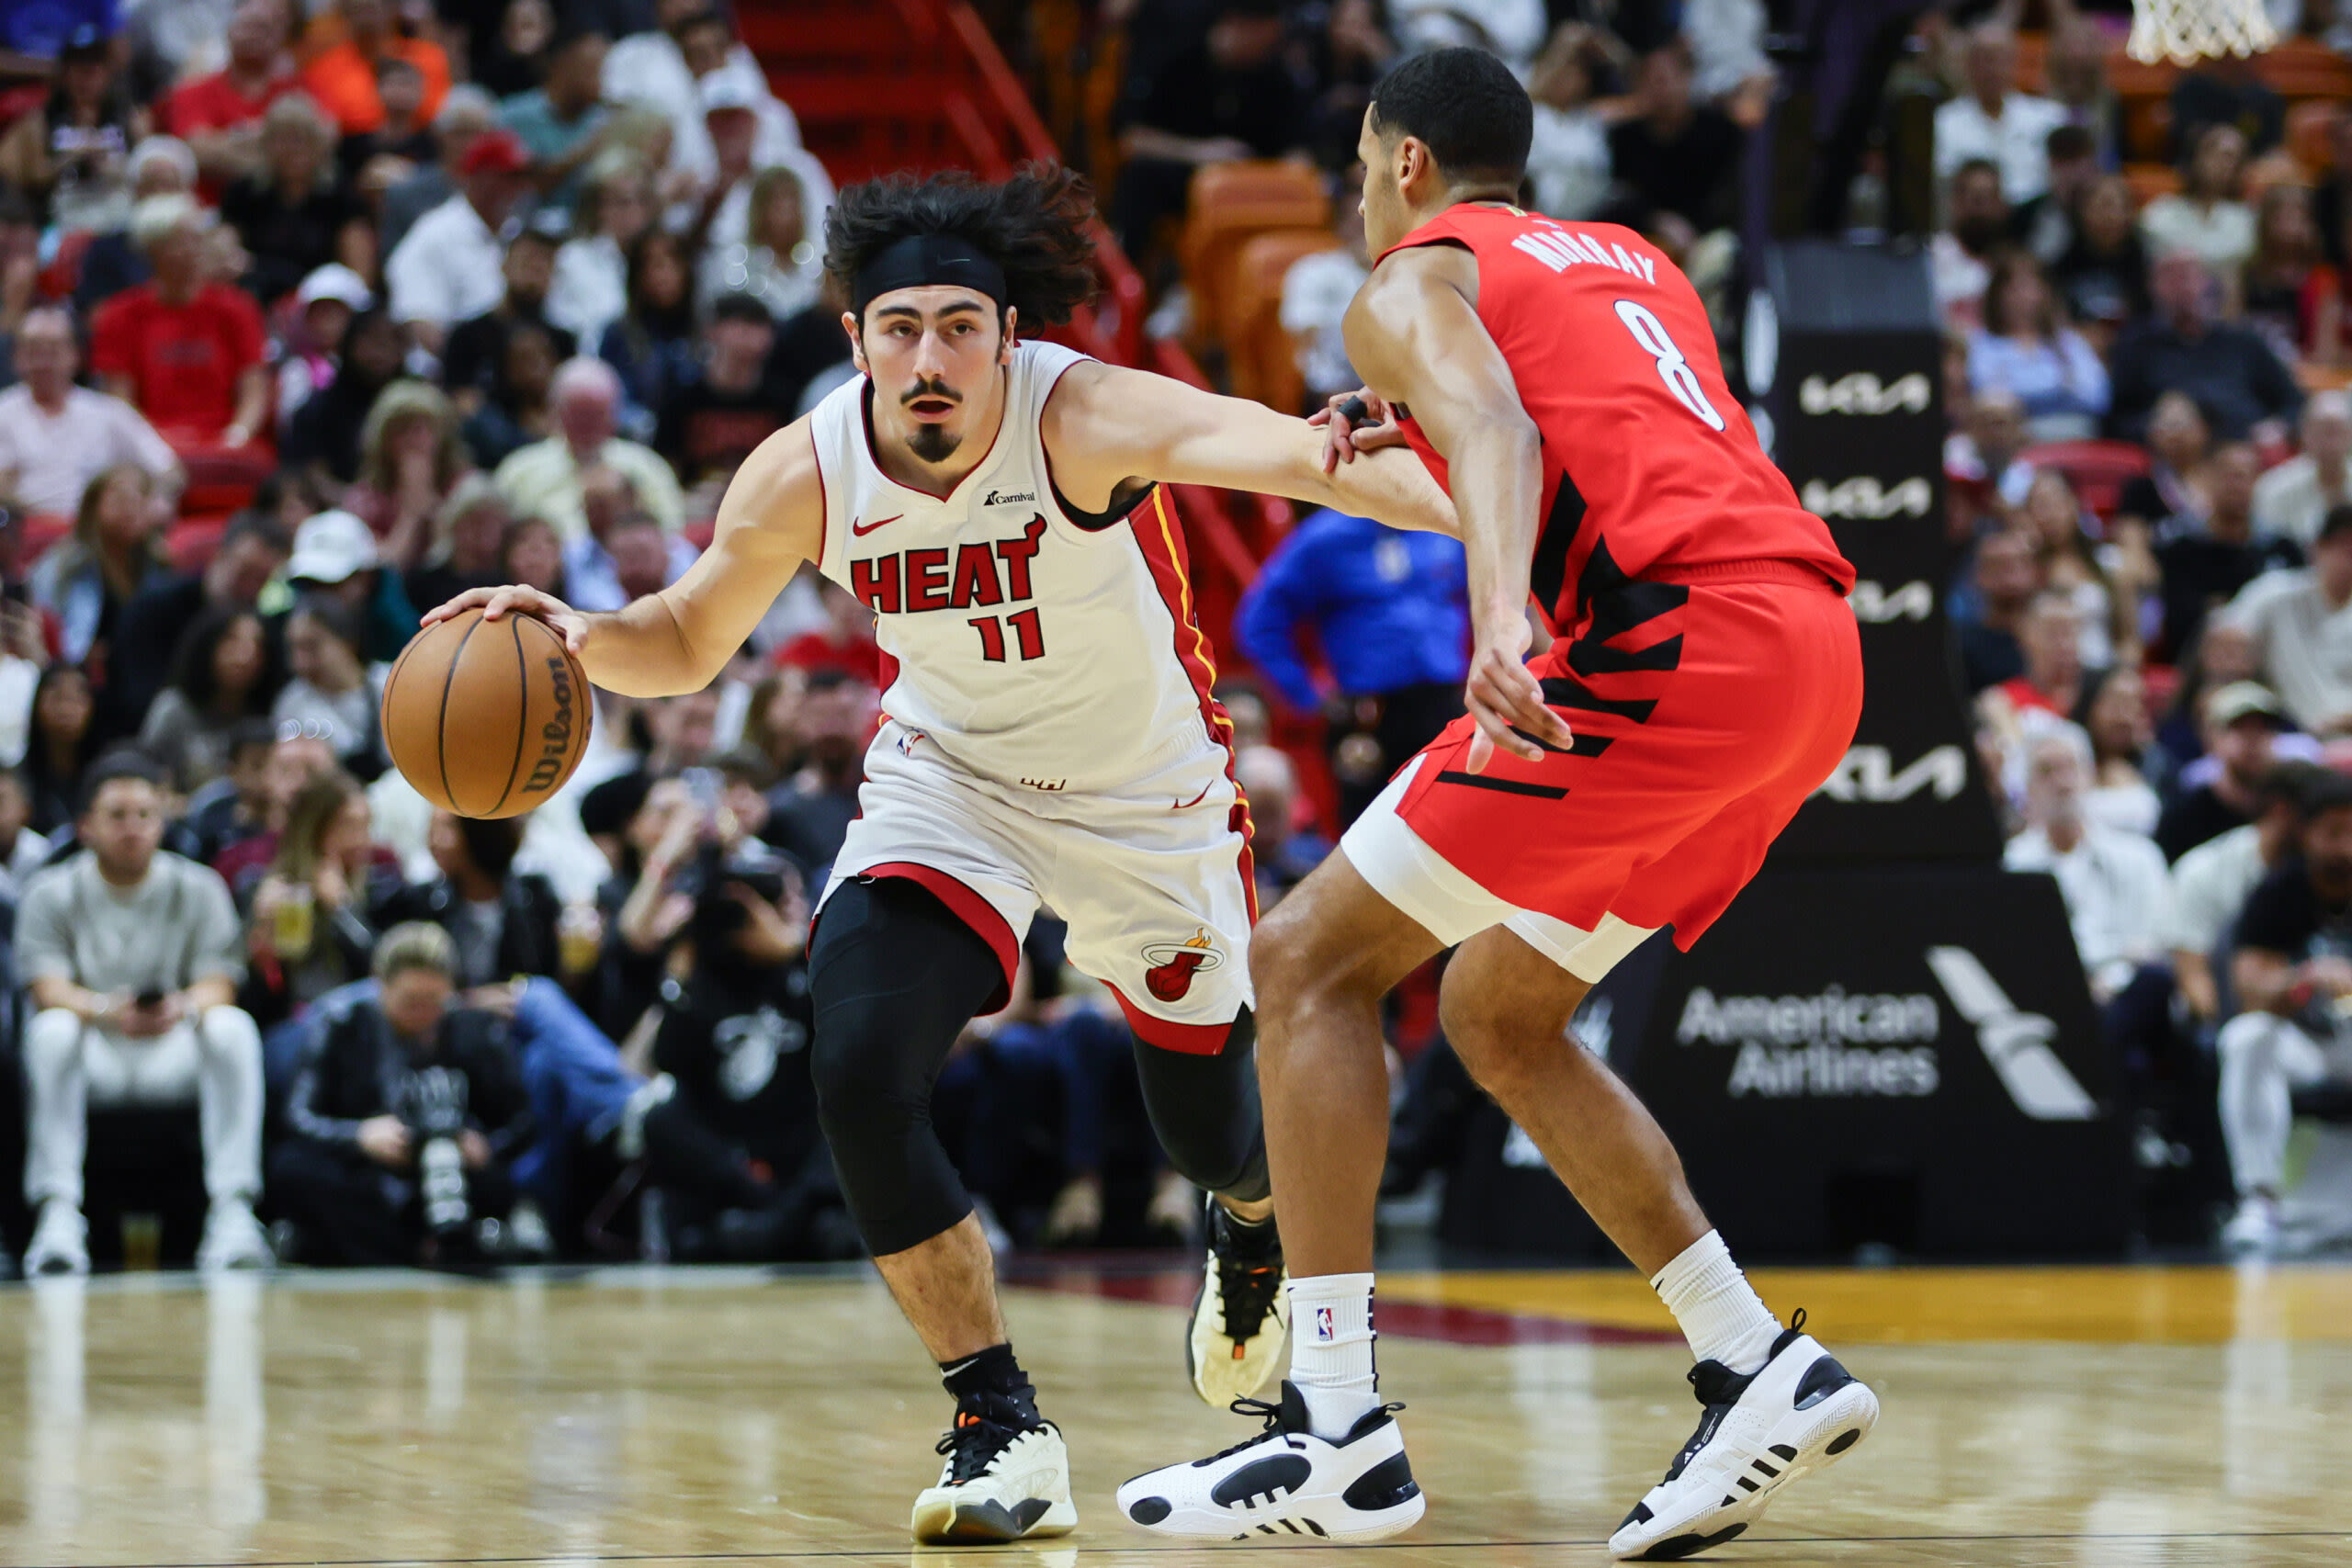 Heat guard Jaime Jaquez Jr. unlikely to play for Mexico in Olympic Qualifying Tournament